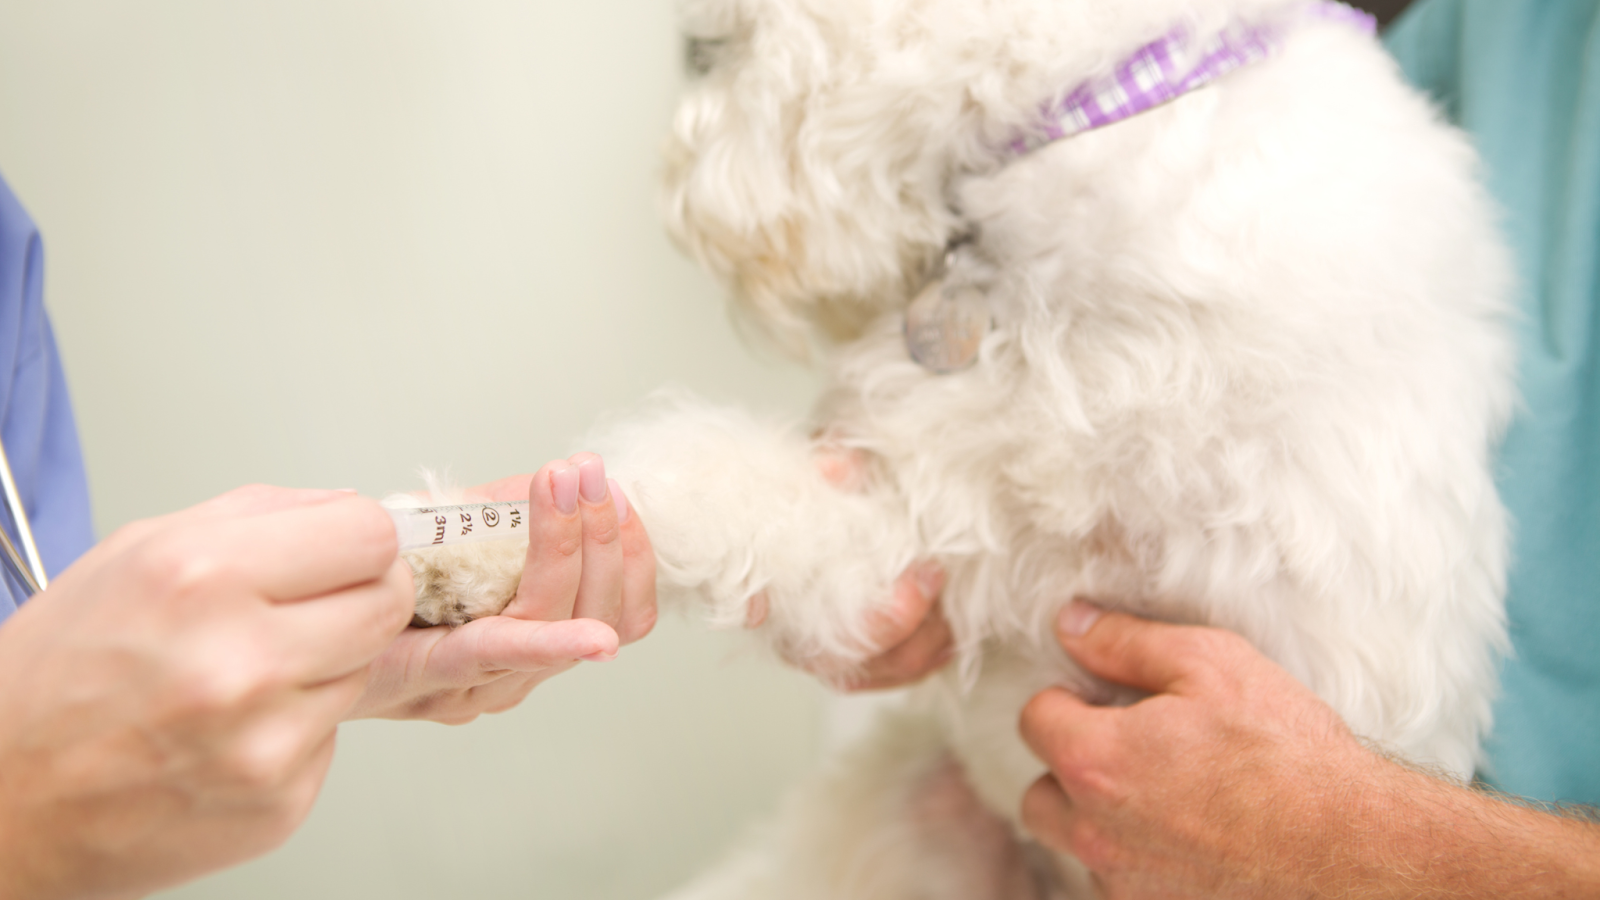 Blood testing, skin scrapings, skin allergy tests and elimination diets are some treatment options for dog allergies.